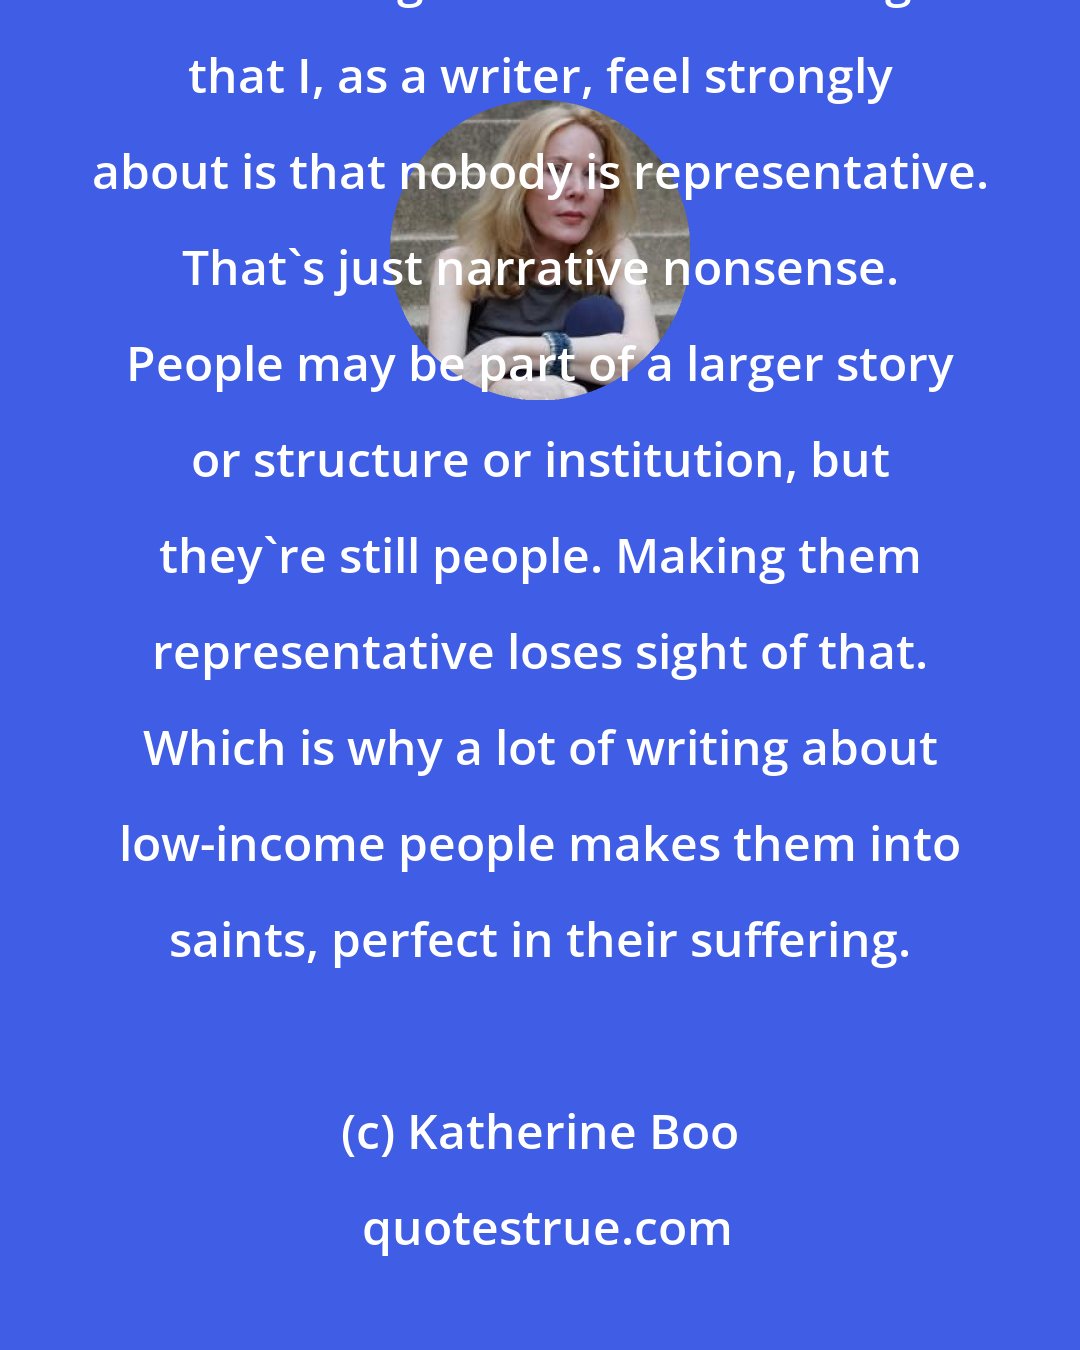 Katherine Boo: When I pick a story, I'm very much aware of the larger issues that it's illuminating. But one of the things that I, as a writer, feel strongly about is that nobody is representative. That's just narrative nonsense. People may be part of a larger story or structure or institution, but they're still people. Making them representative loses sight of that. Which is why a lot of writing about low-income people makes them into saints, perfect in their suffering.